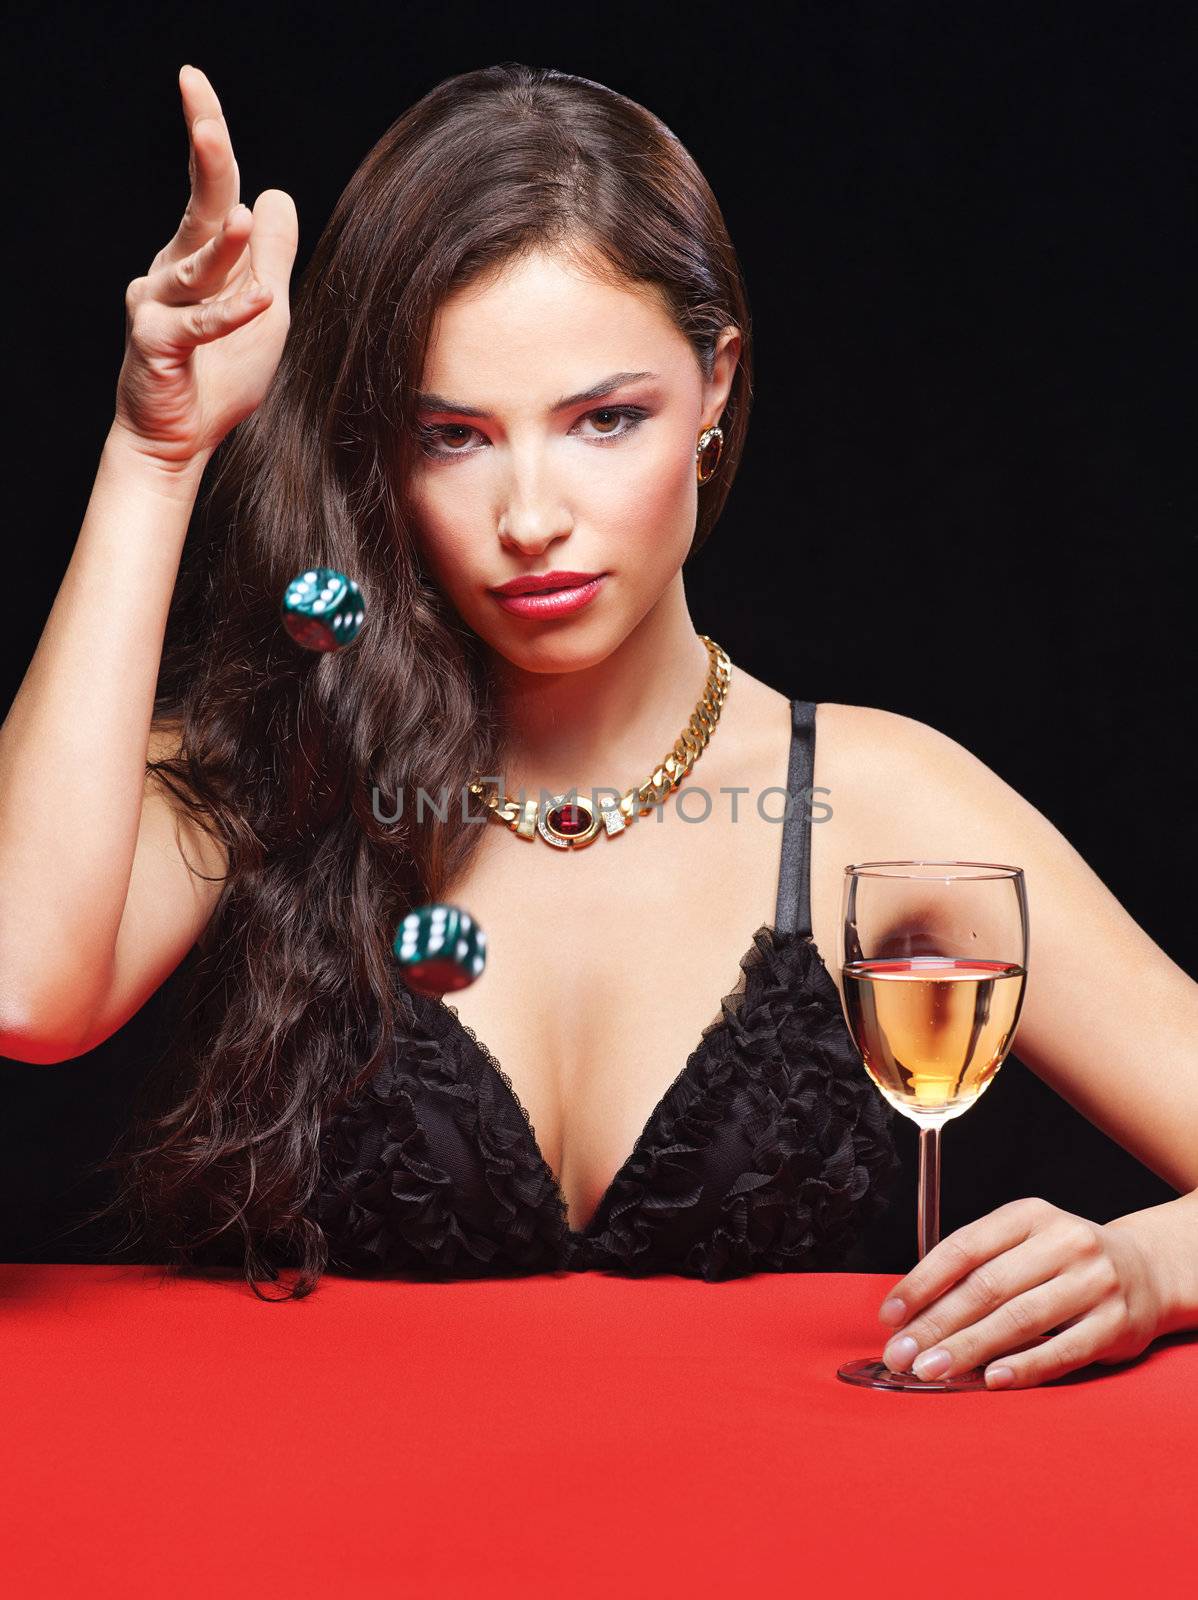 pretty young woman throwing dices on red table